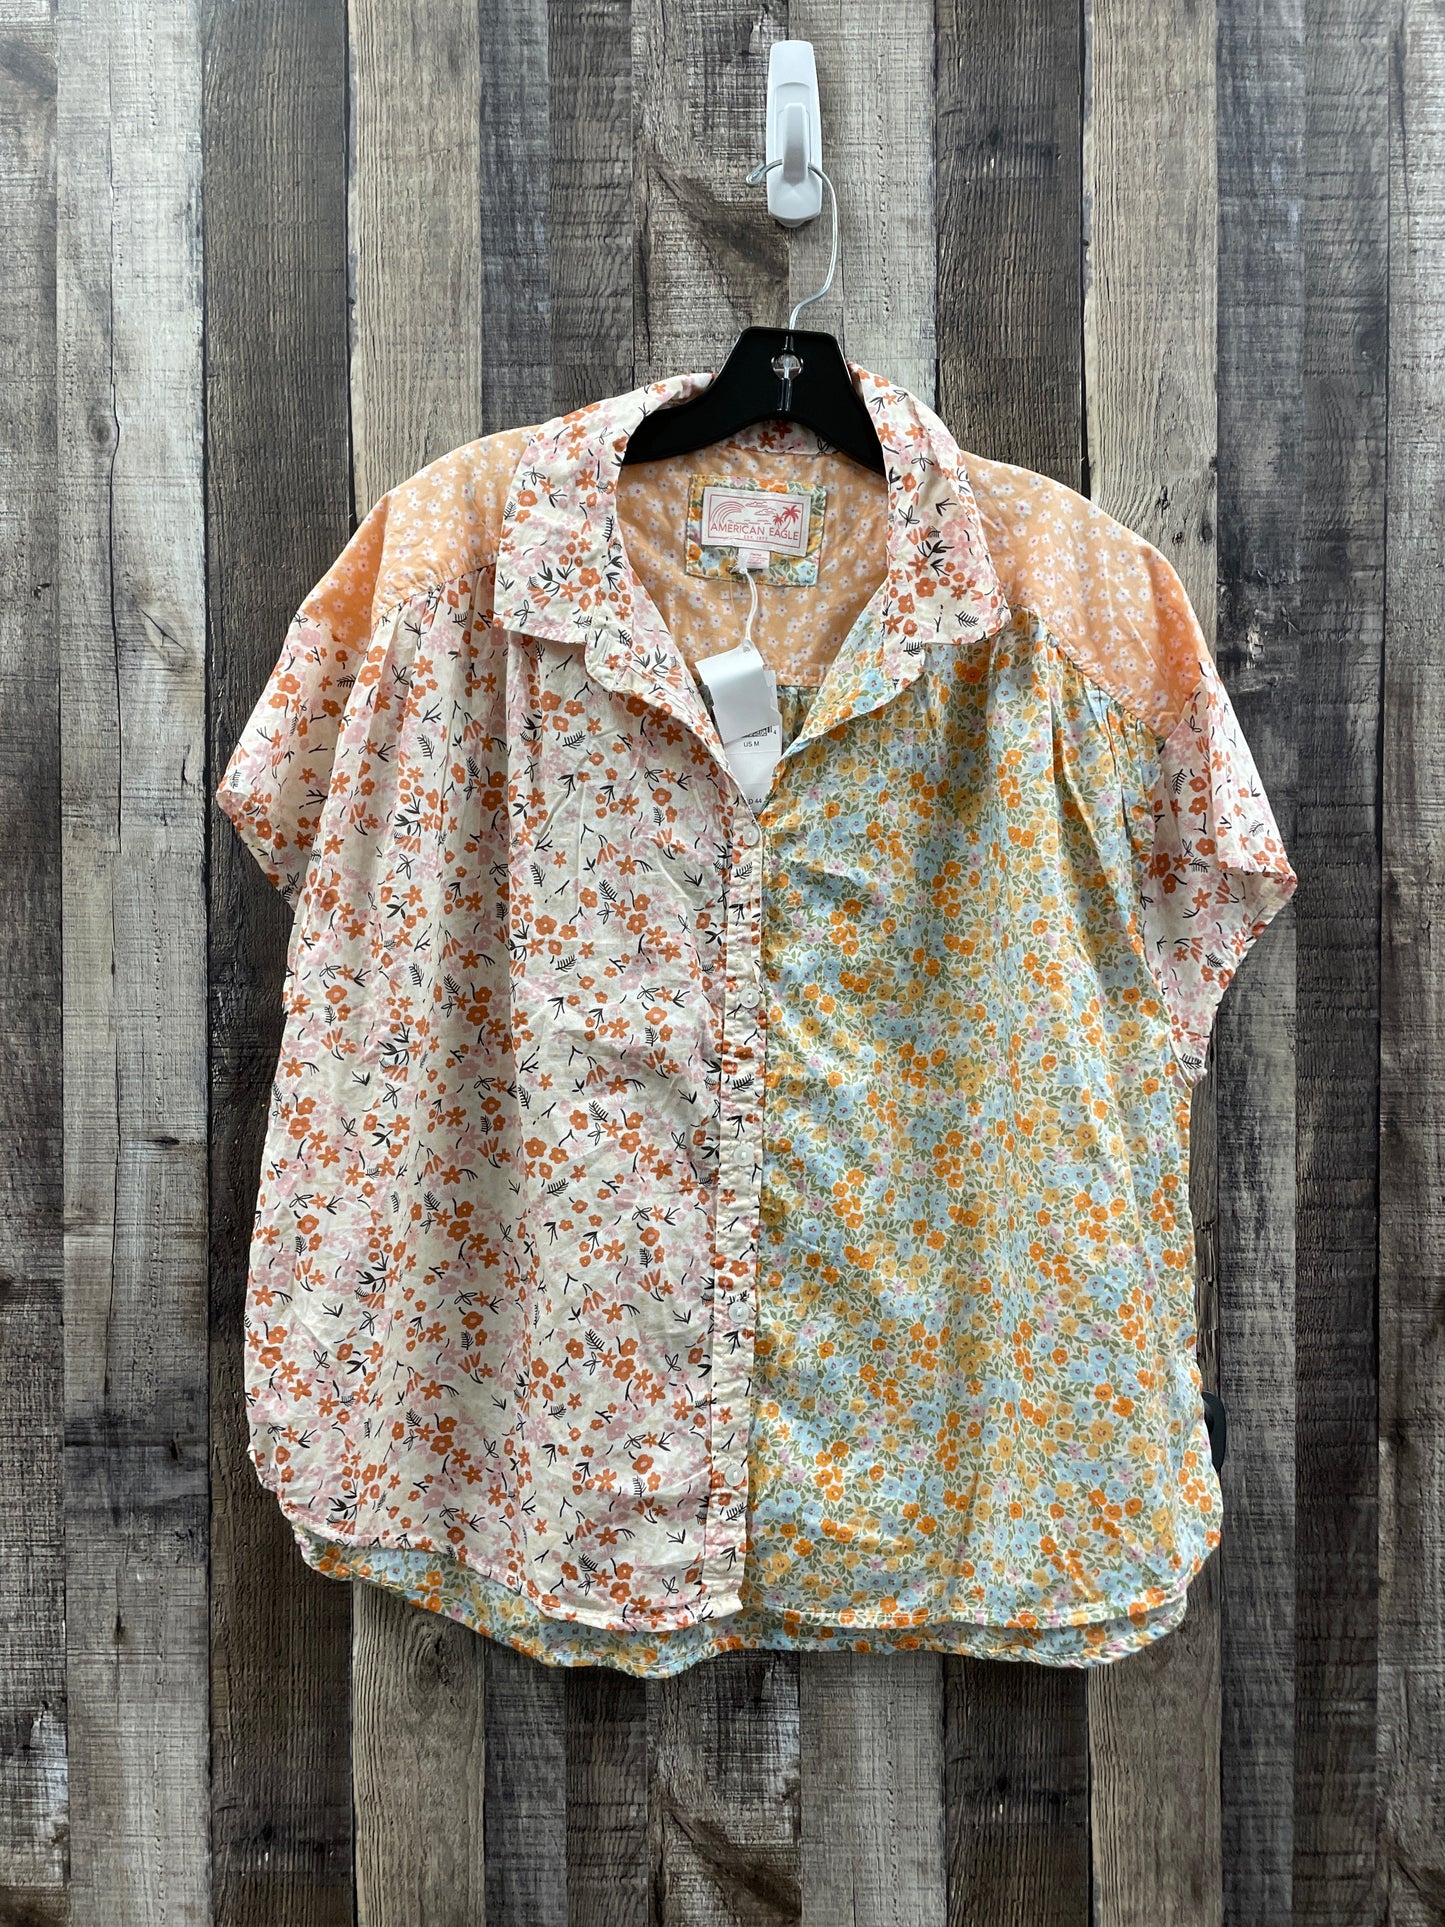 Floral Print Top Short Sleeve American Eagle, Size M